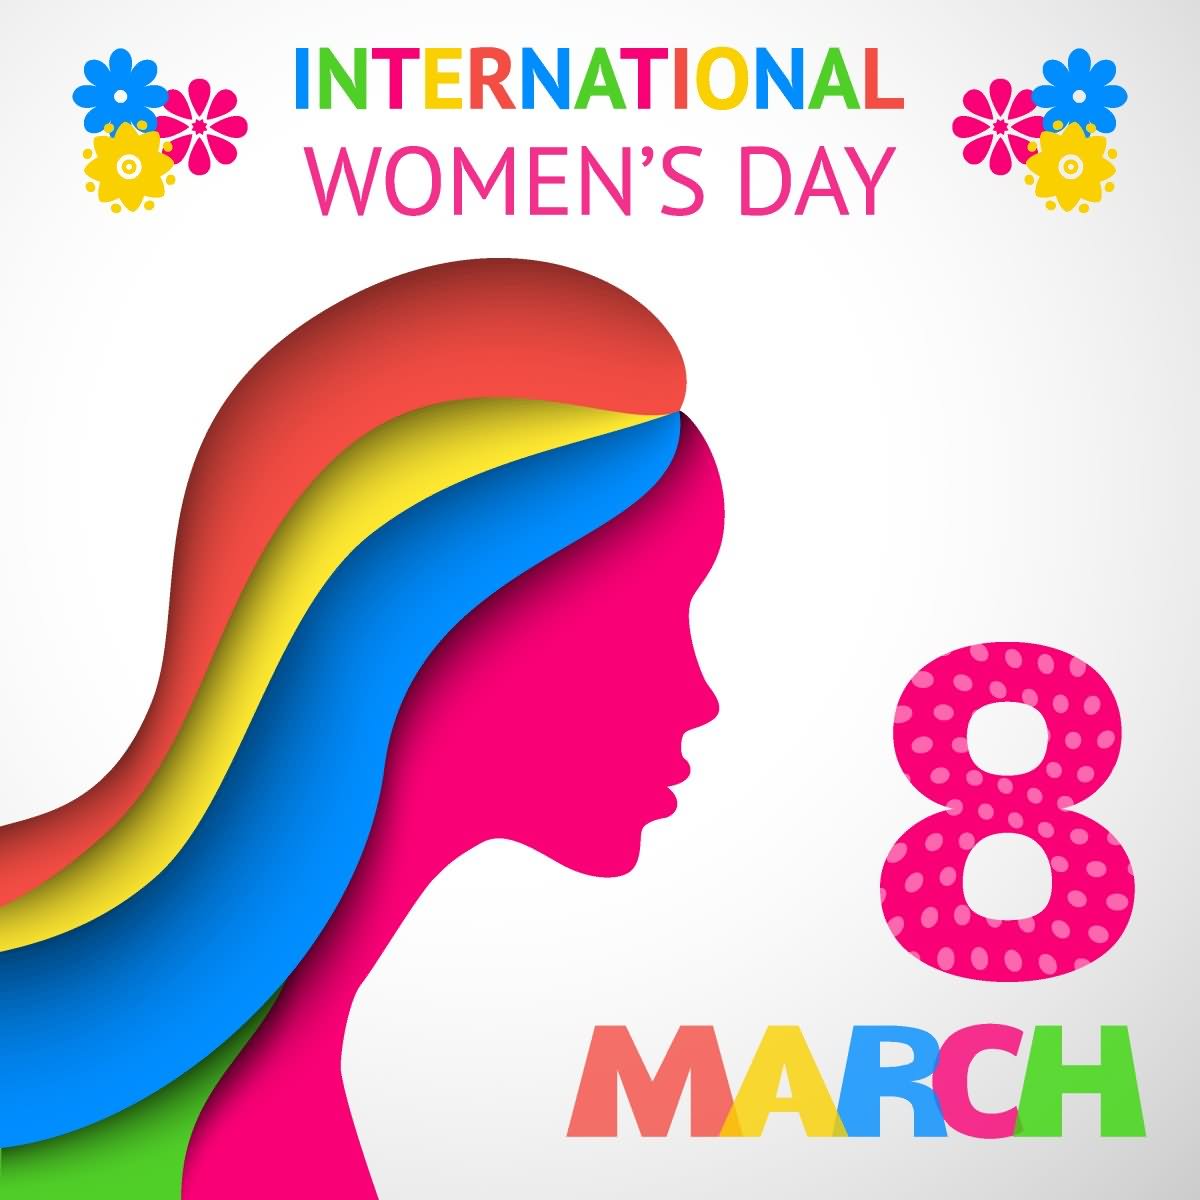 International Women S Day March 8 Colorful Text Picture's Day Image 2019 Download